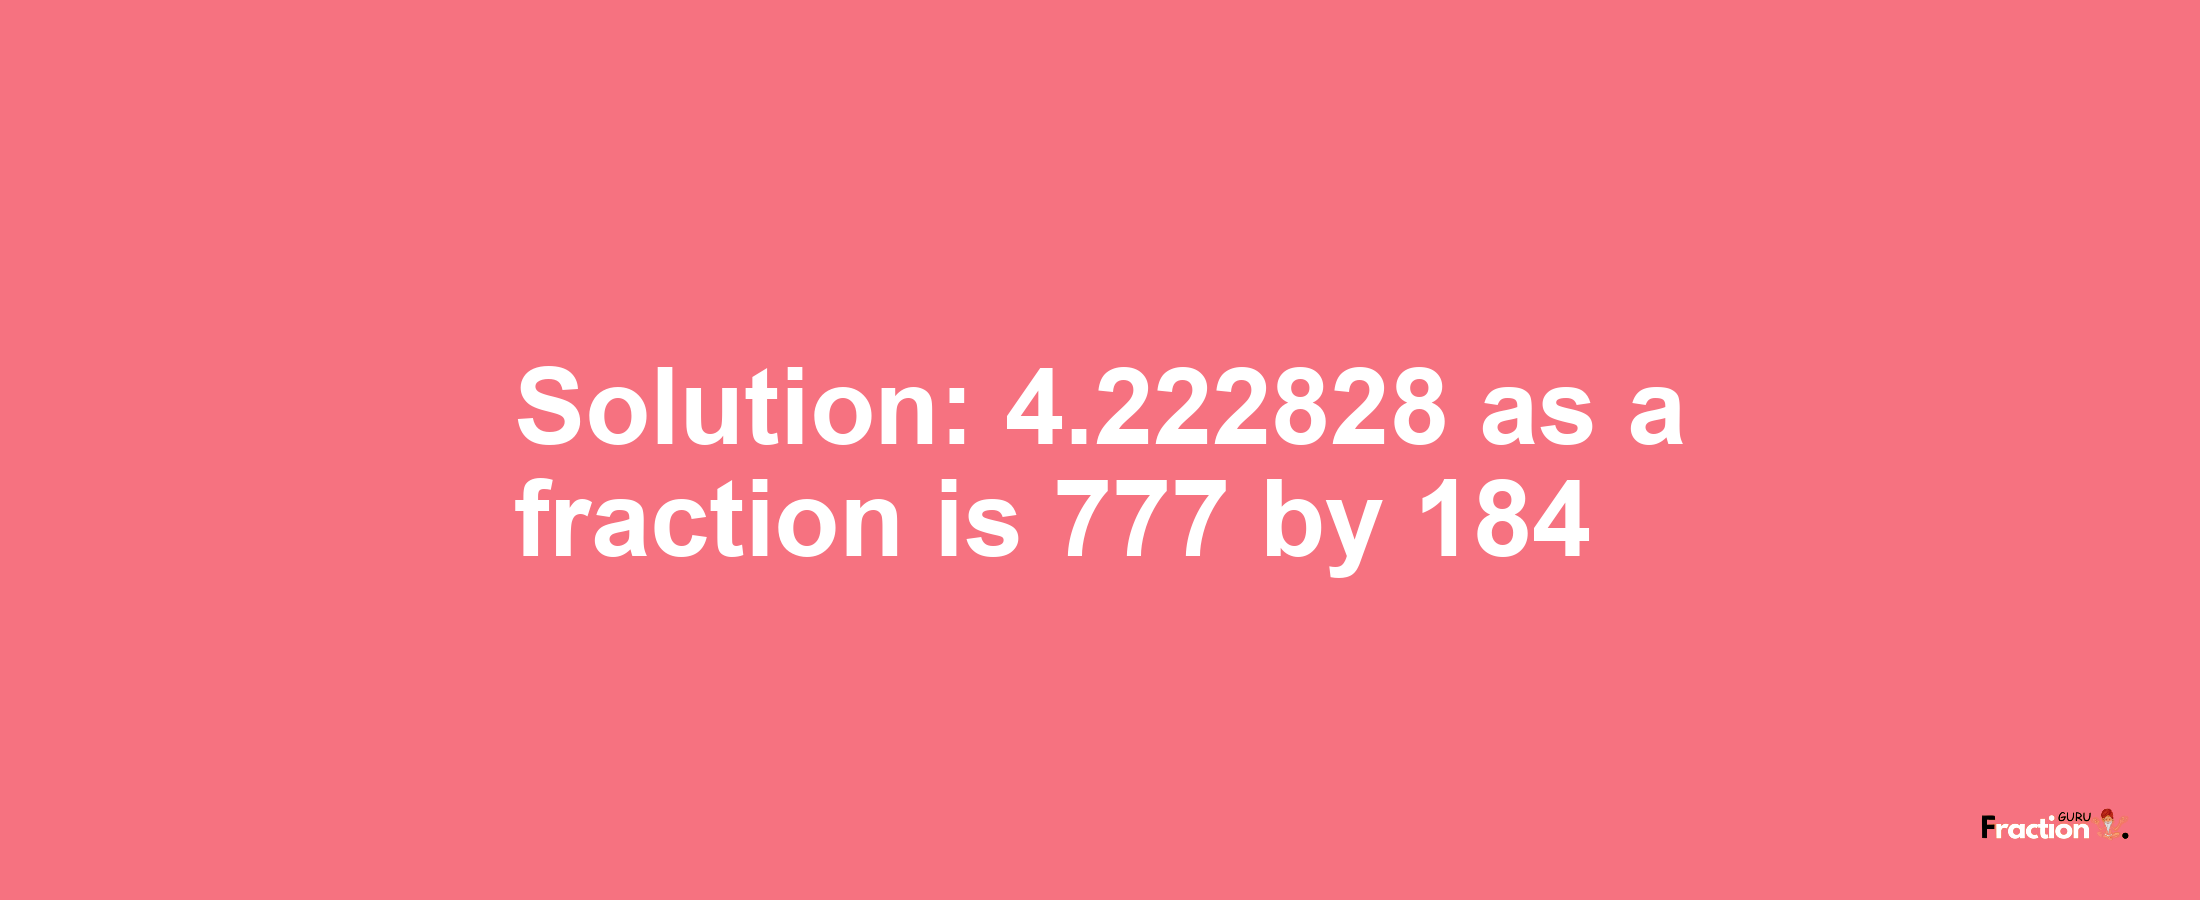 Solution:4.222828 as a fraction is 777/184